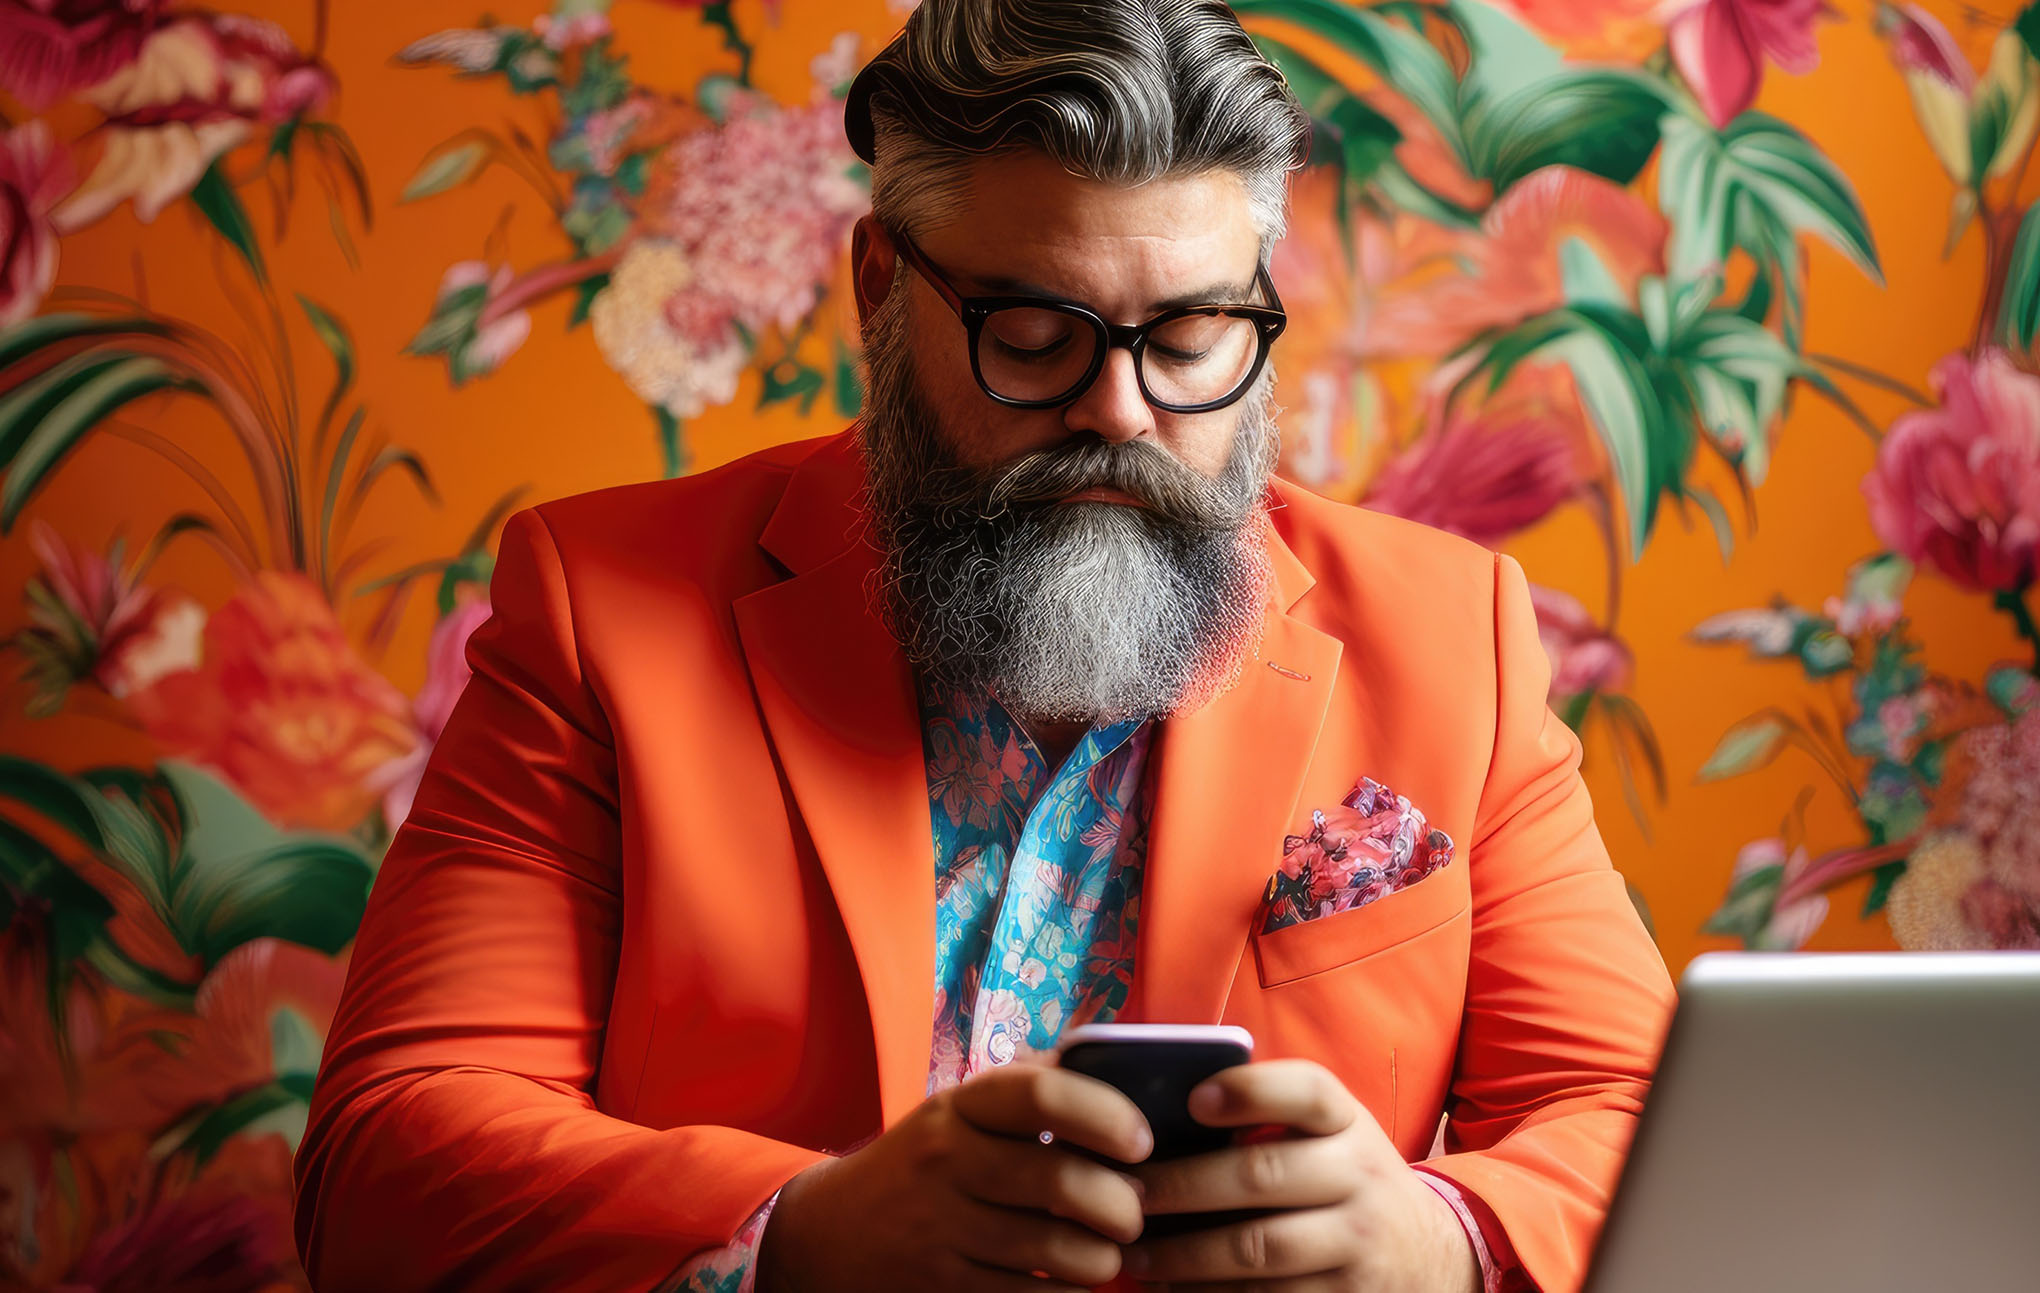 A stylish man with a full beard wearing a vibrant orange suit and floral shirt uses a smartphone. he is seated in front of a brightly colored floral-patterned wall, with a laptop next to him.